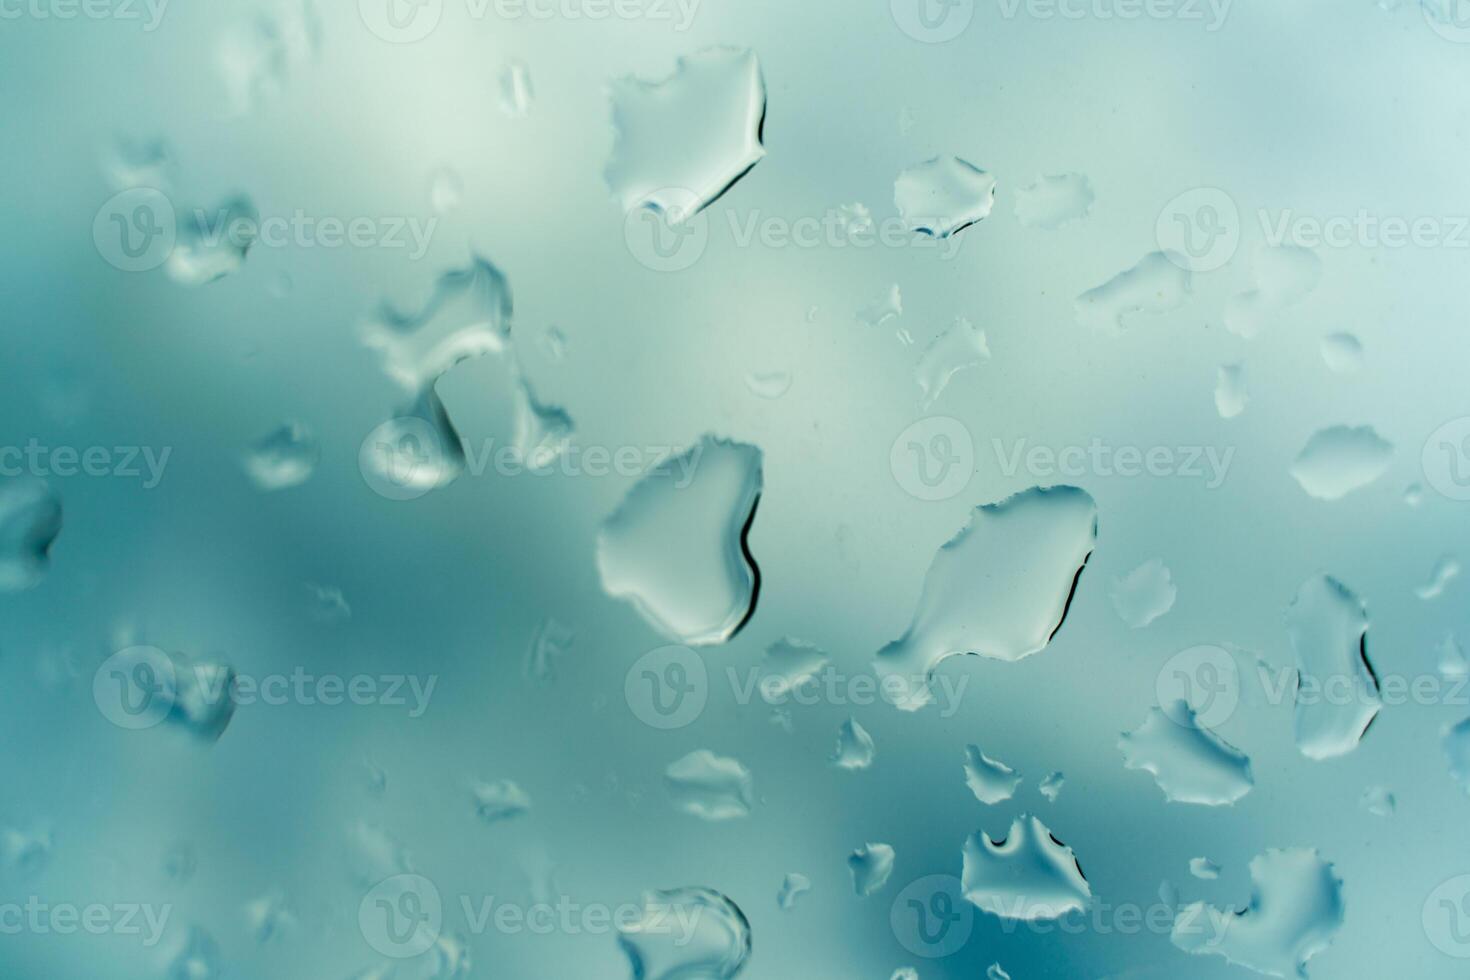 Water drops on glass against blue sky, rainy season concept. Window view background screensaver photo